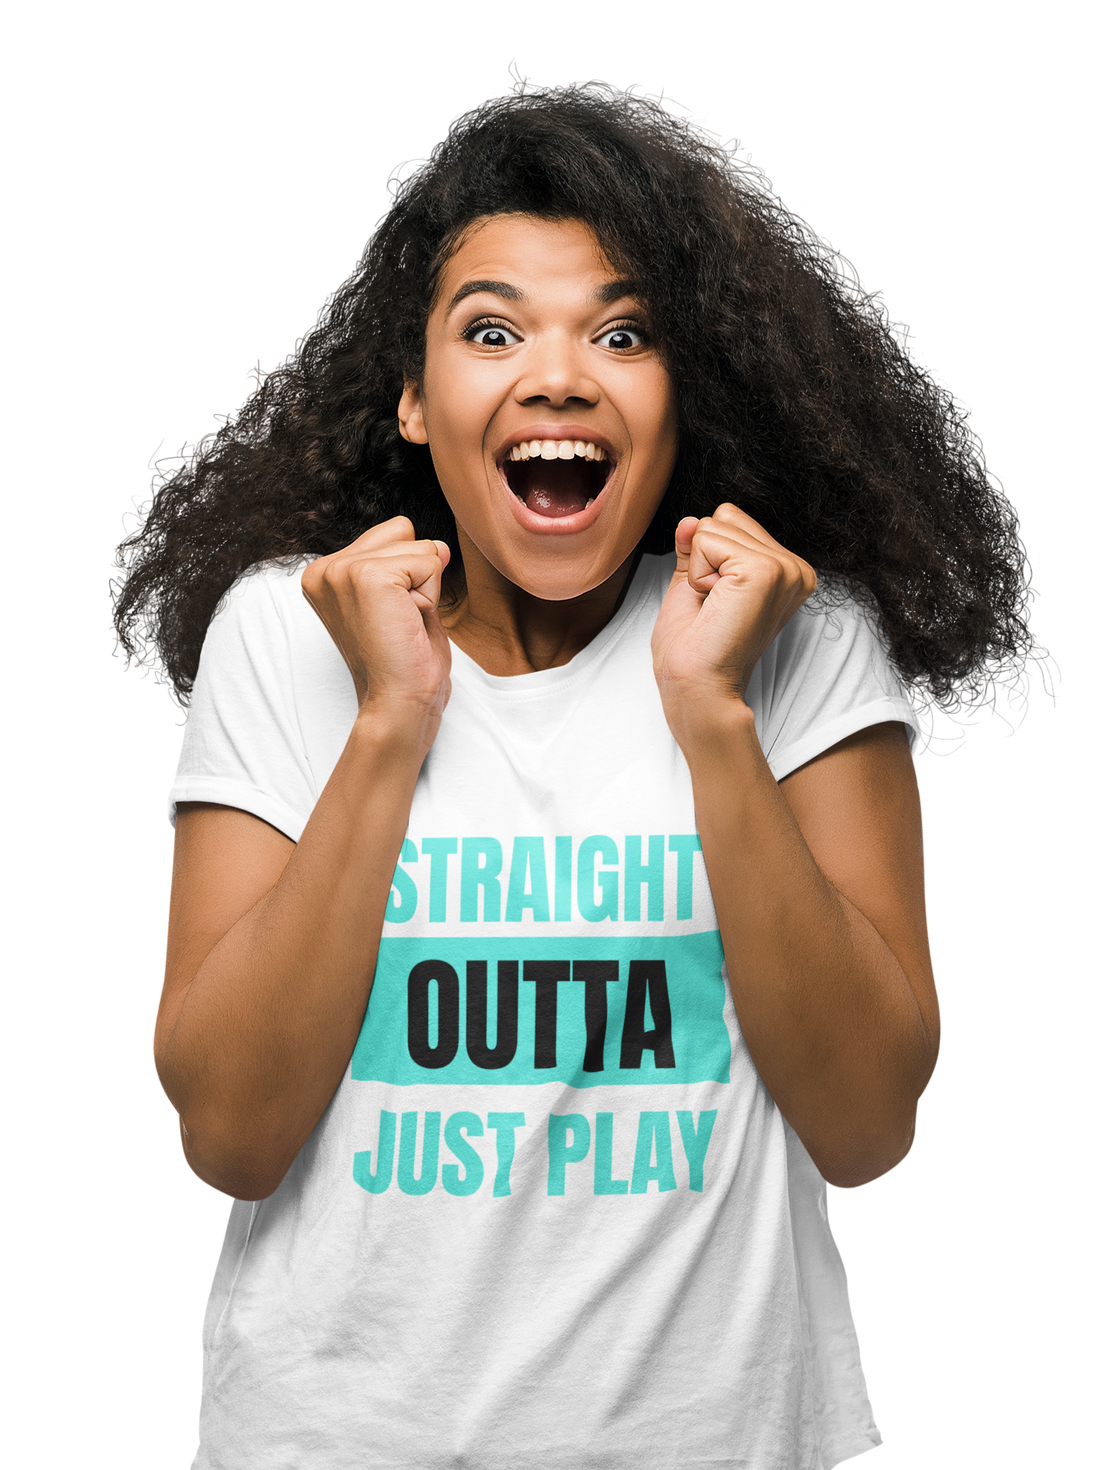 Straight Outta Just Play Tee